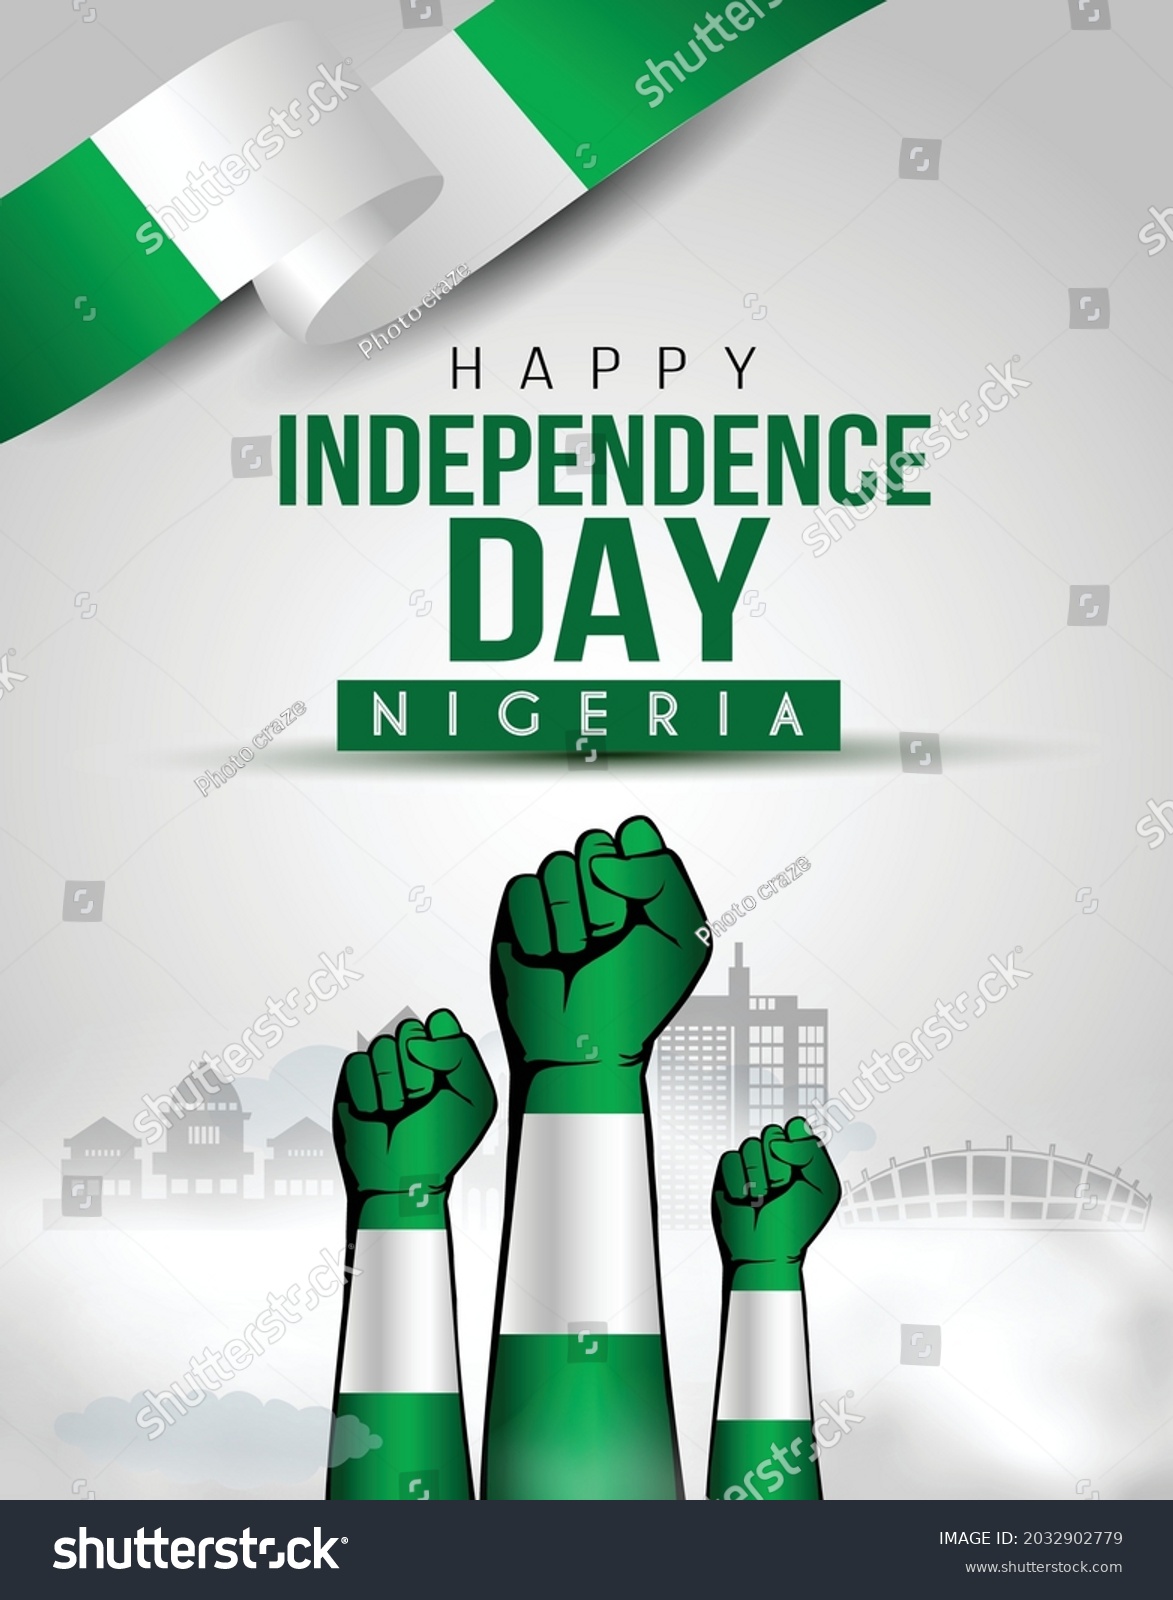 Nigeria At 63 Happy Independence Day messages, quotes, prayers, wishes